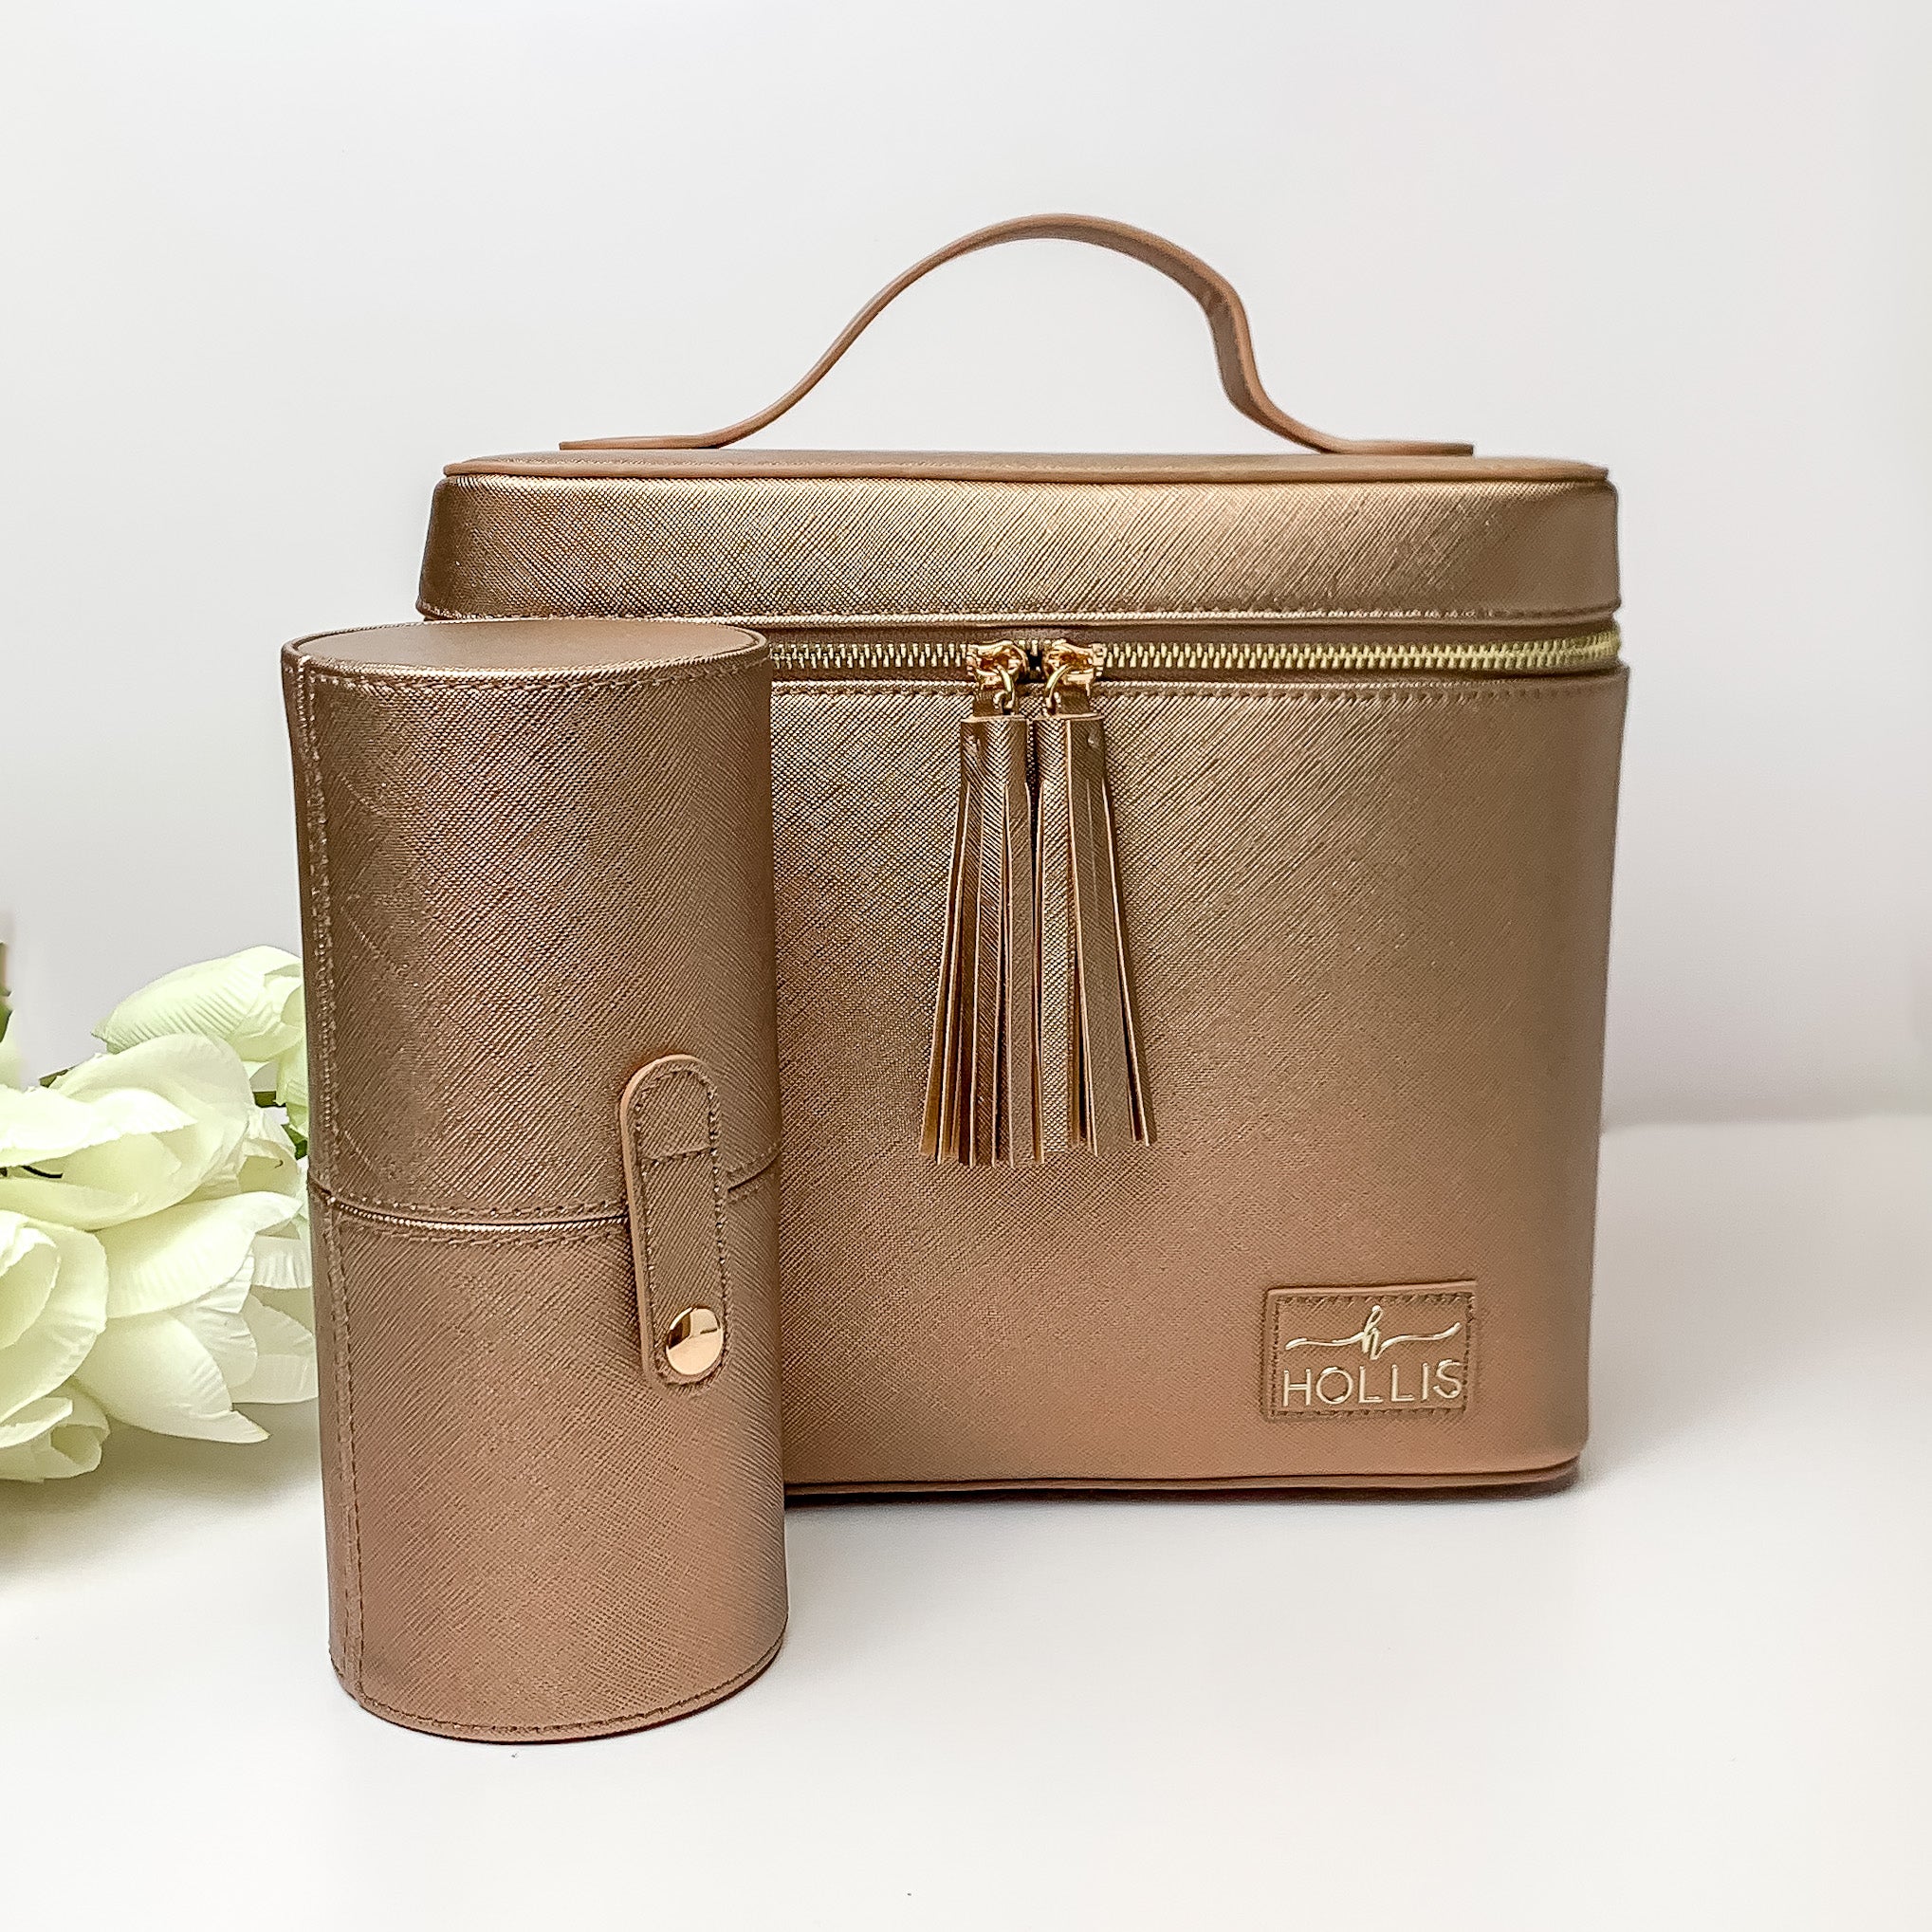 Hollis | Lux Bag in Metallic Mocha - Giddy Up Glamour Boutique